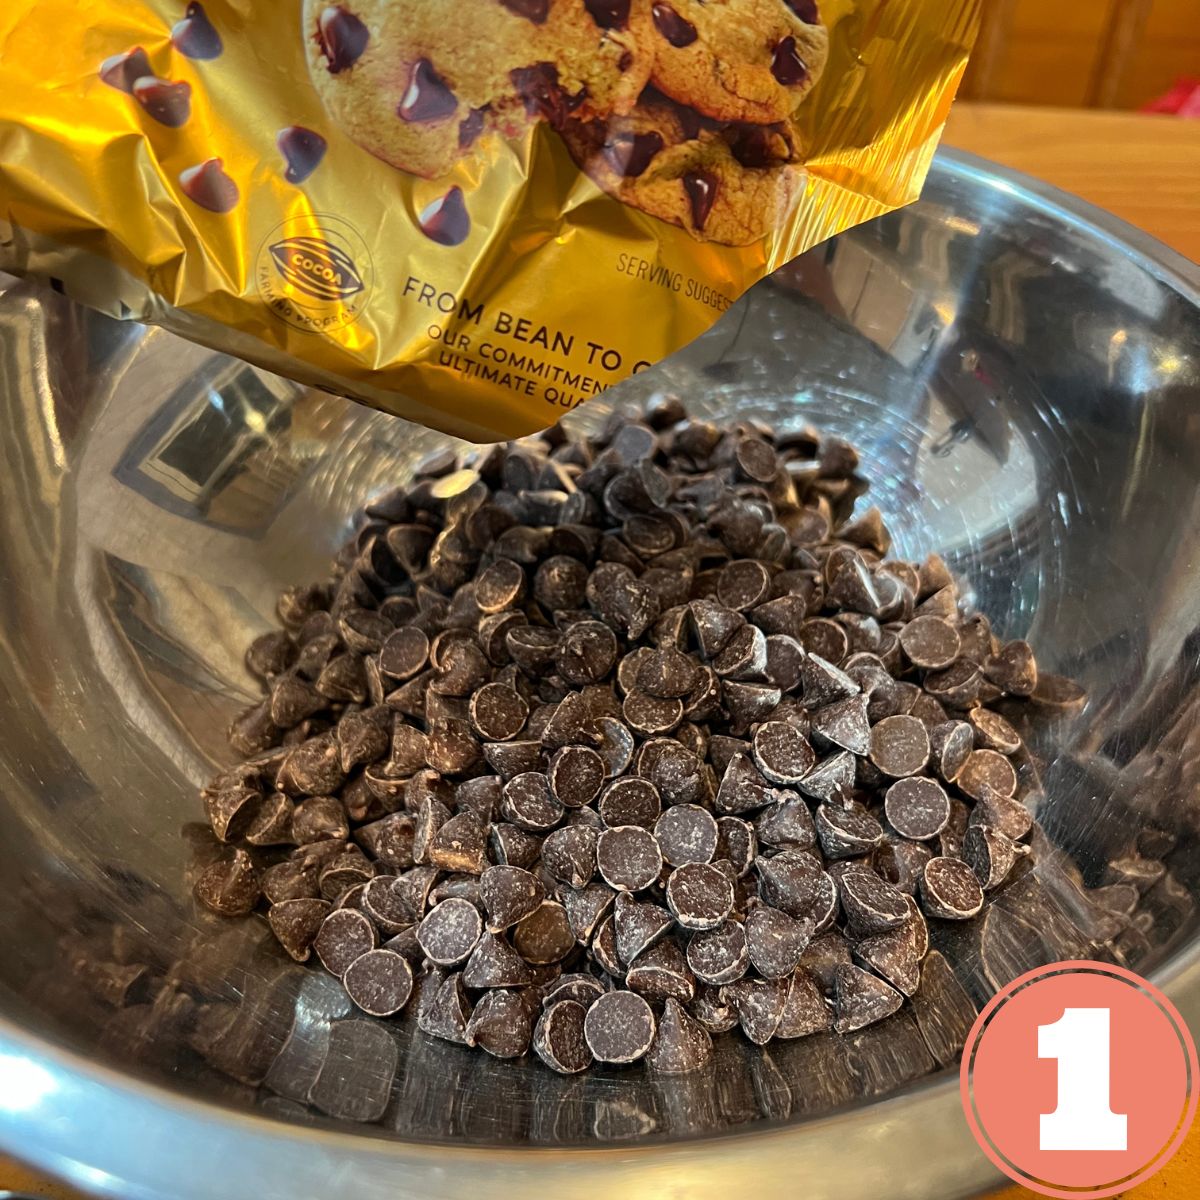 Pouring Ghirardelli chocolate chips into a stainless steel mixing bowl